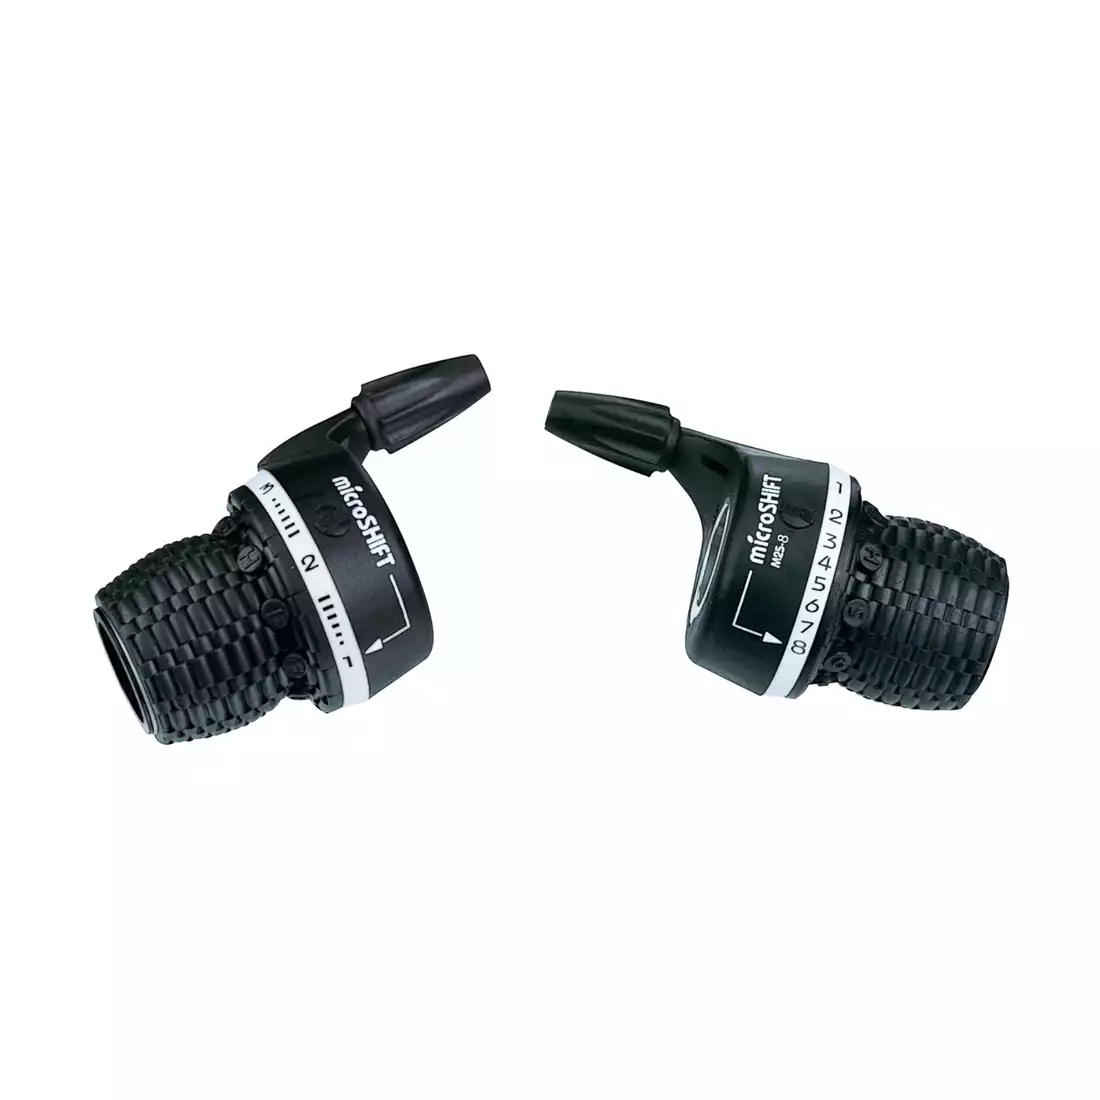 MICROSHIFT 8-speed (3x8) bicycle shift levers, pair, black